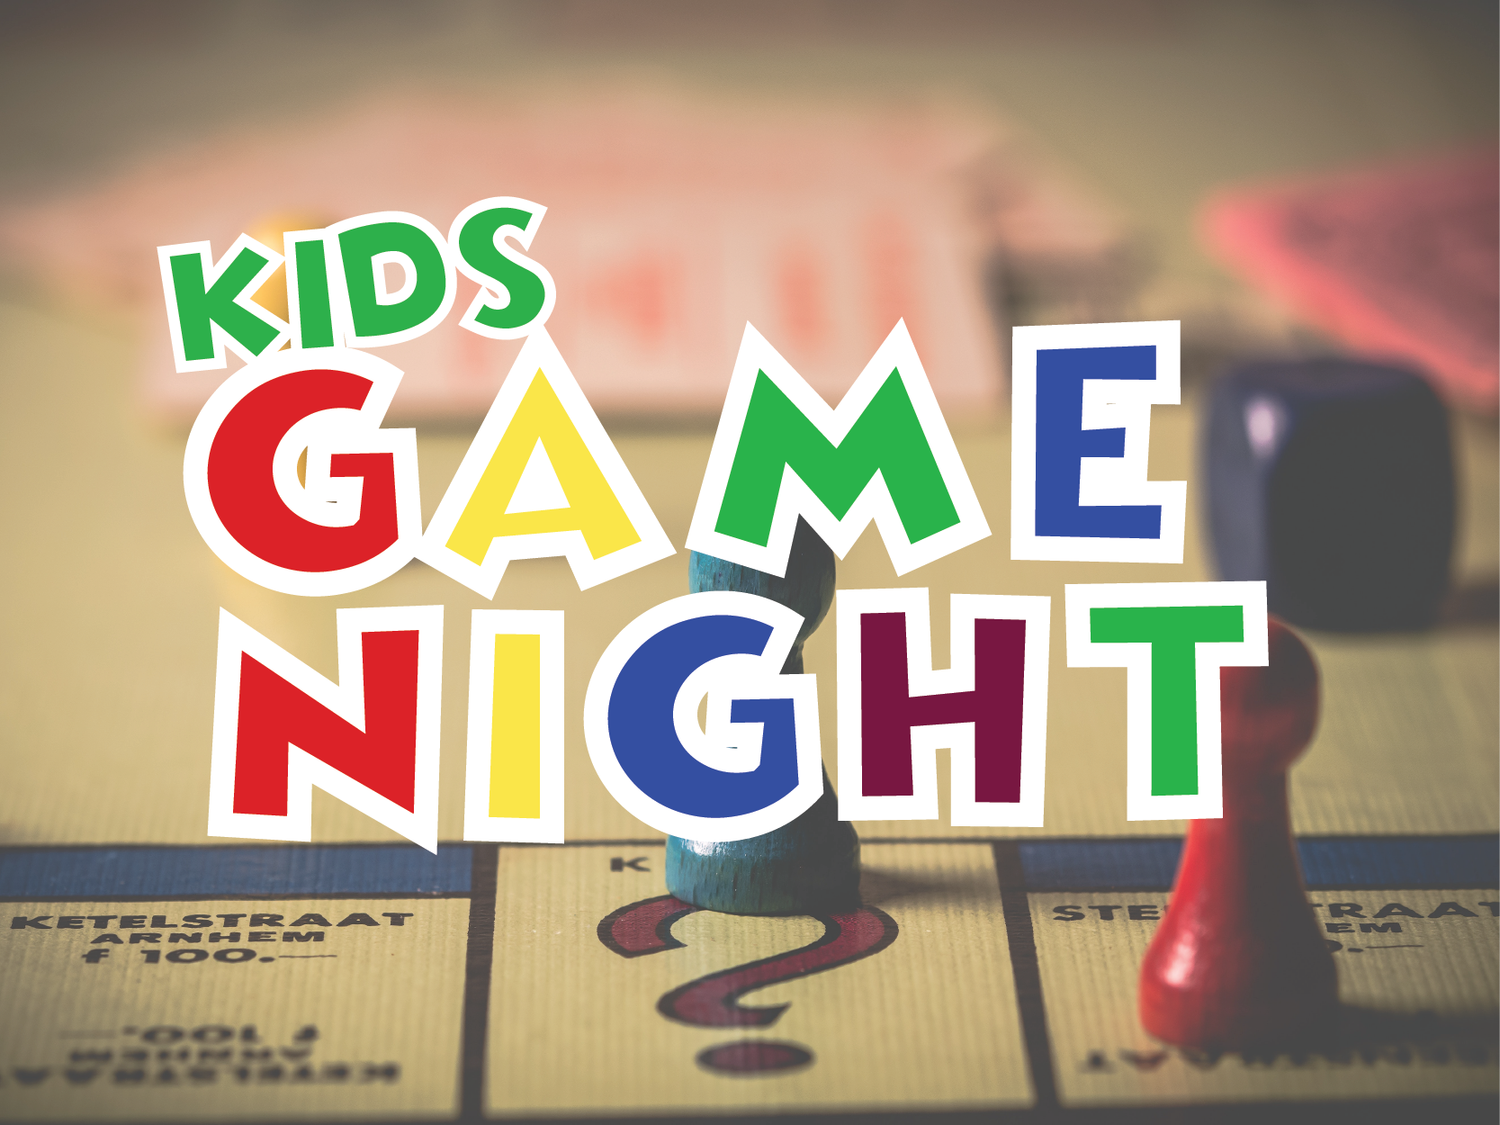 Kids Game Night graphic with image of a board game behind it